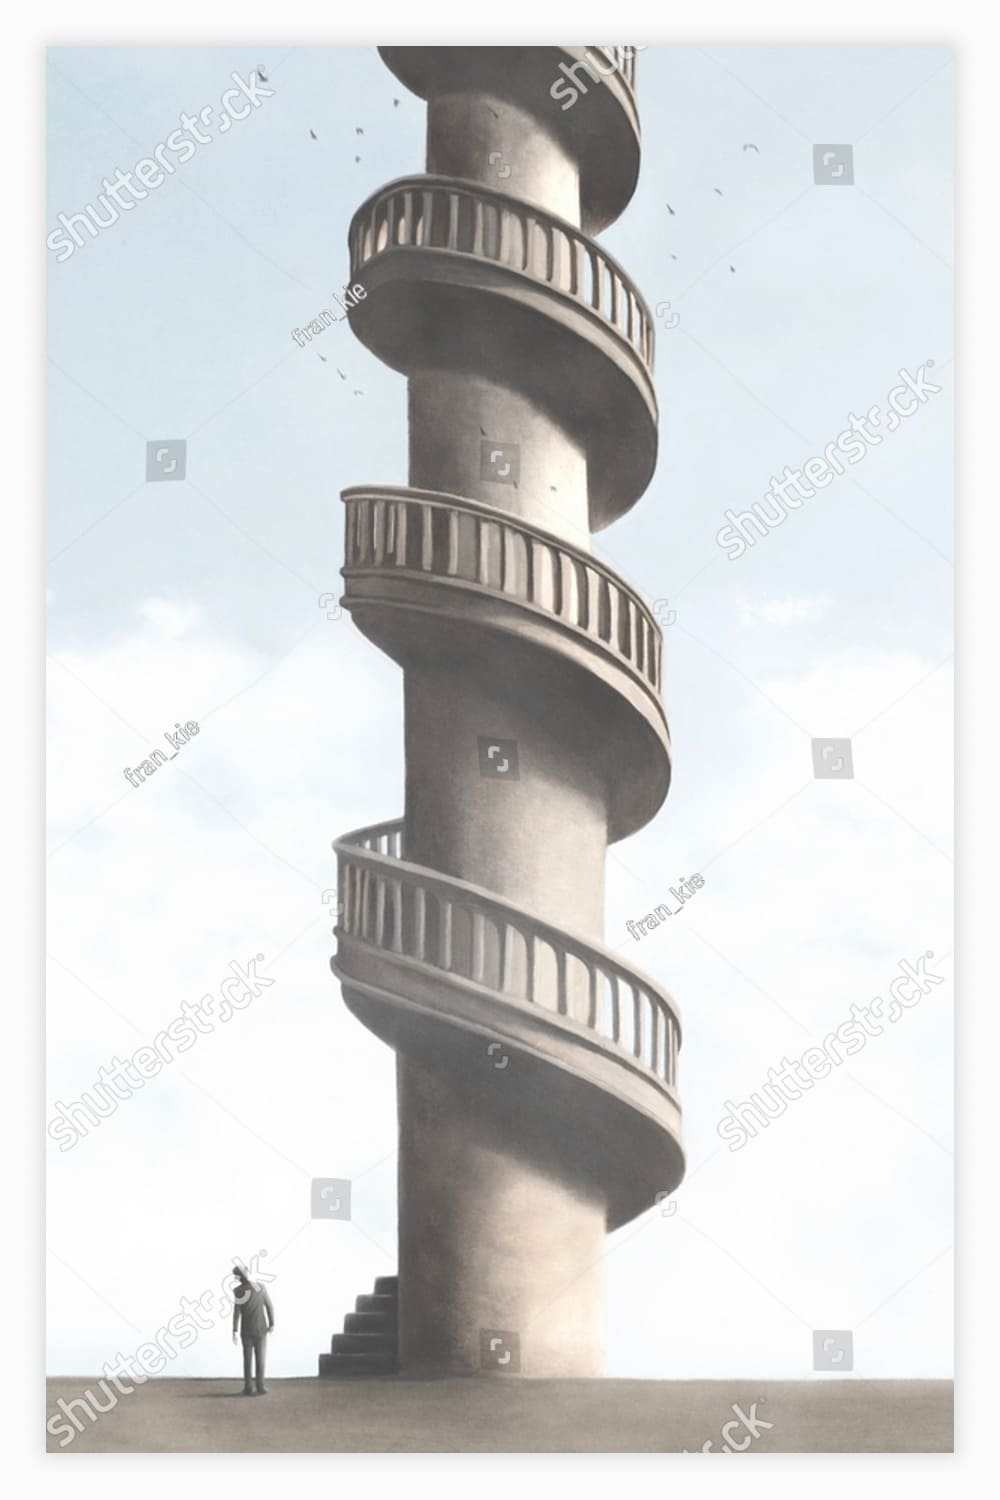 Illustration of man rising high spiral tower, surreal abstract concept.